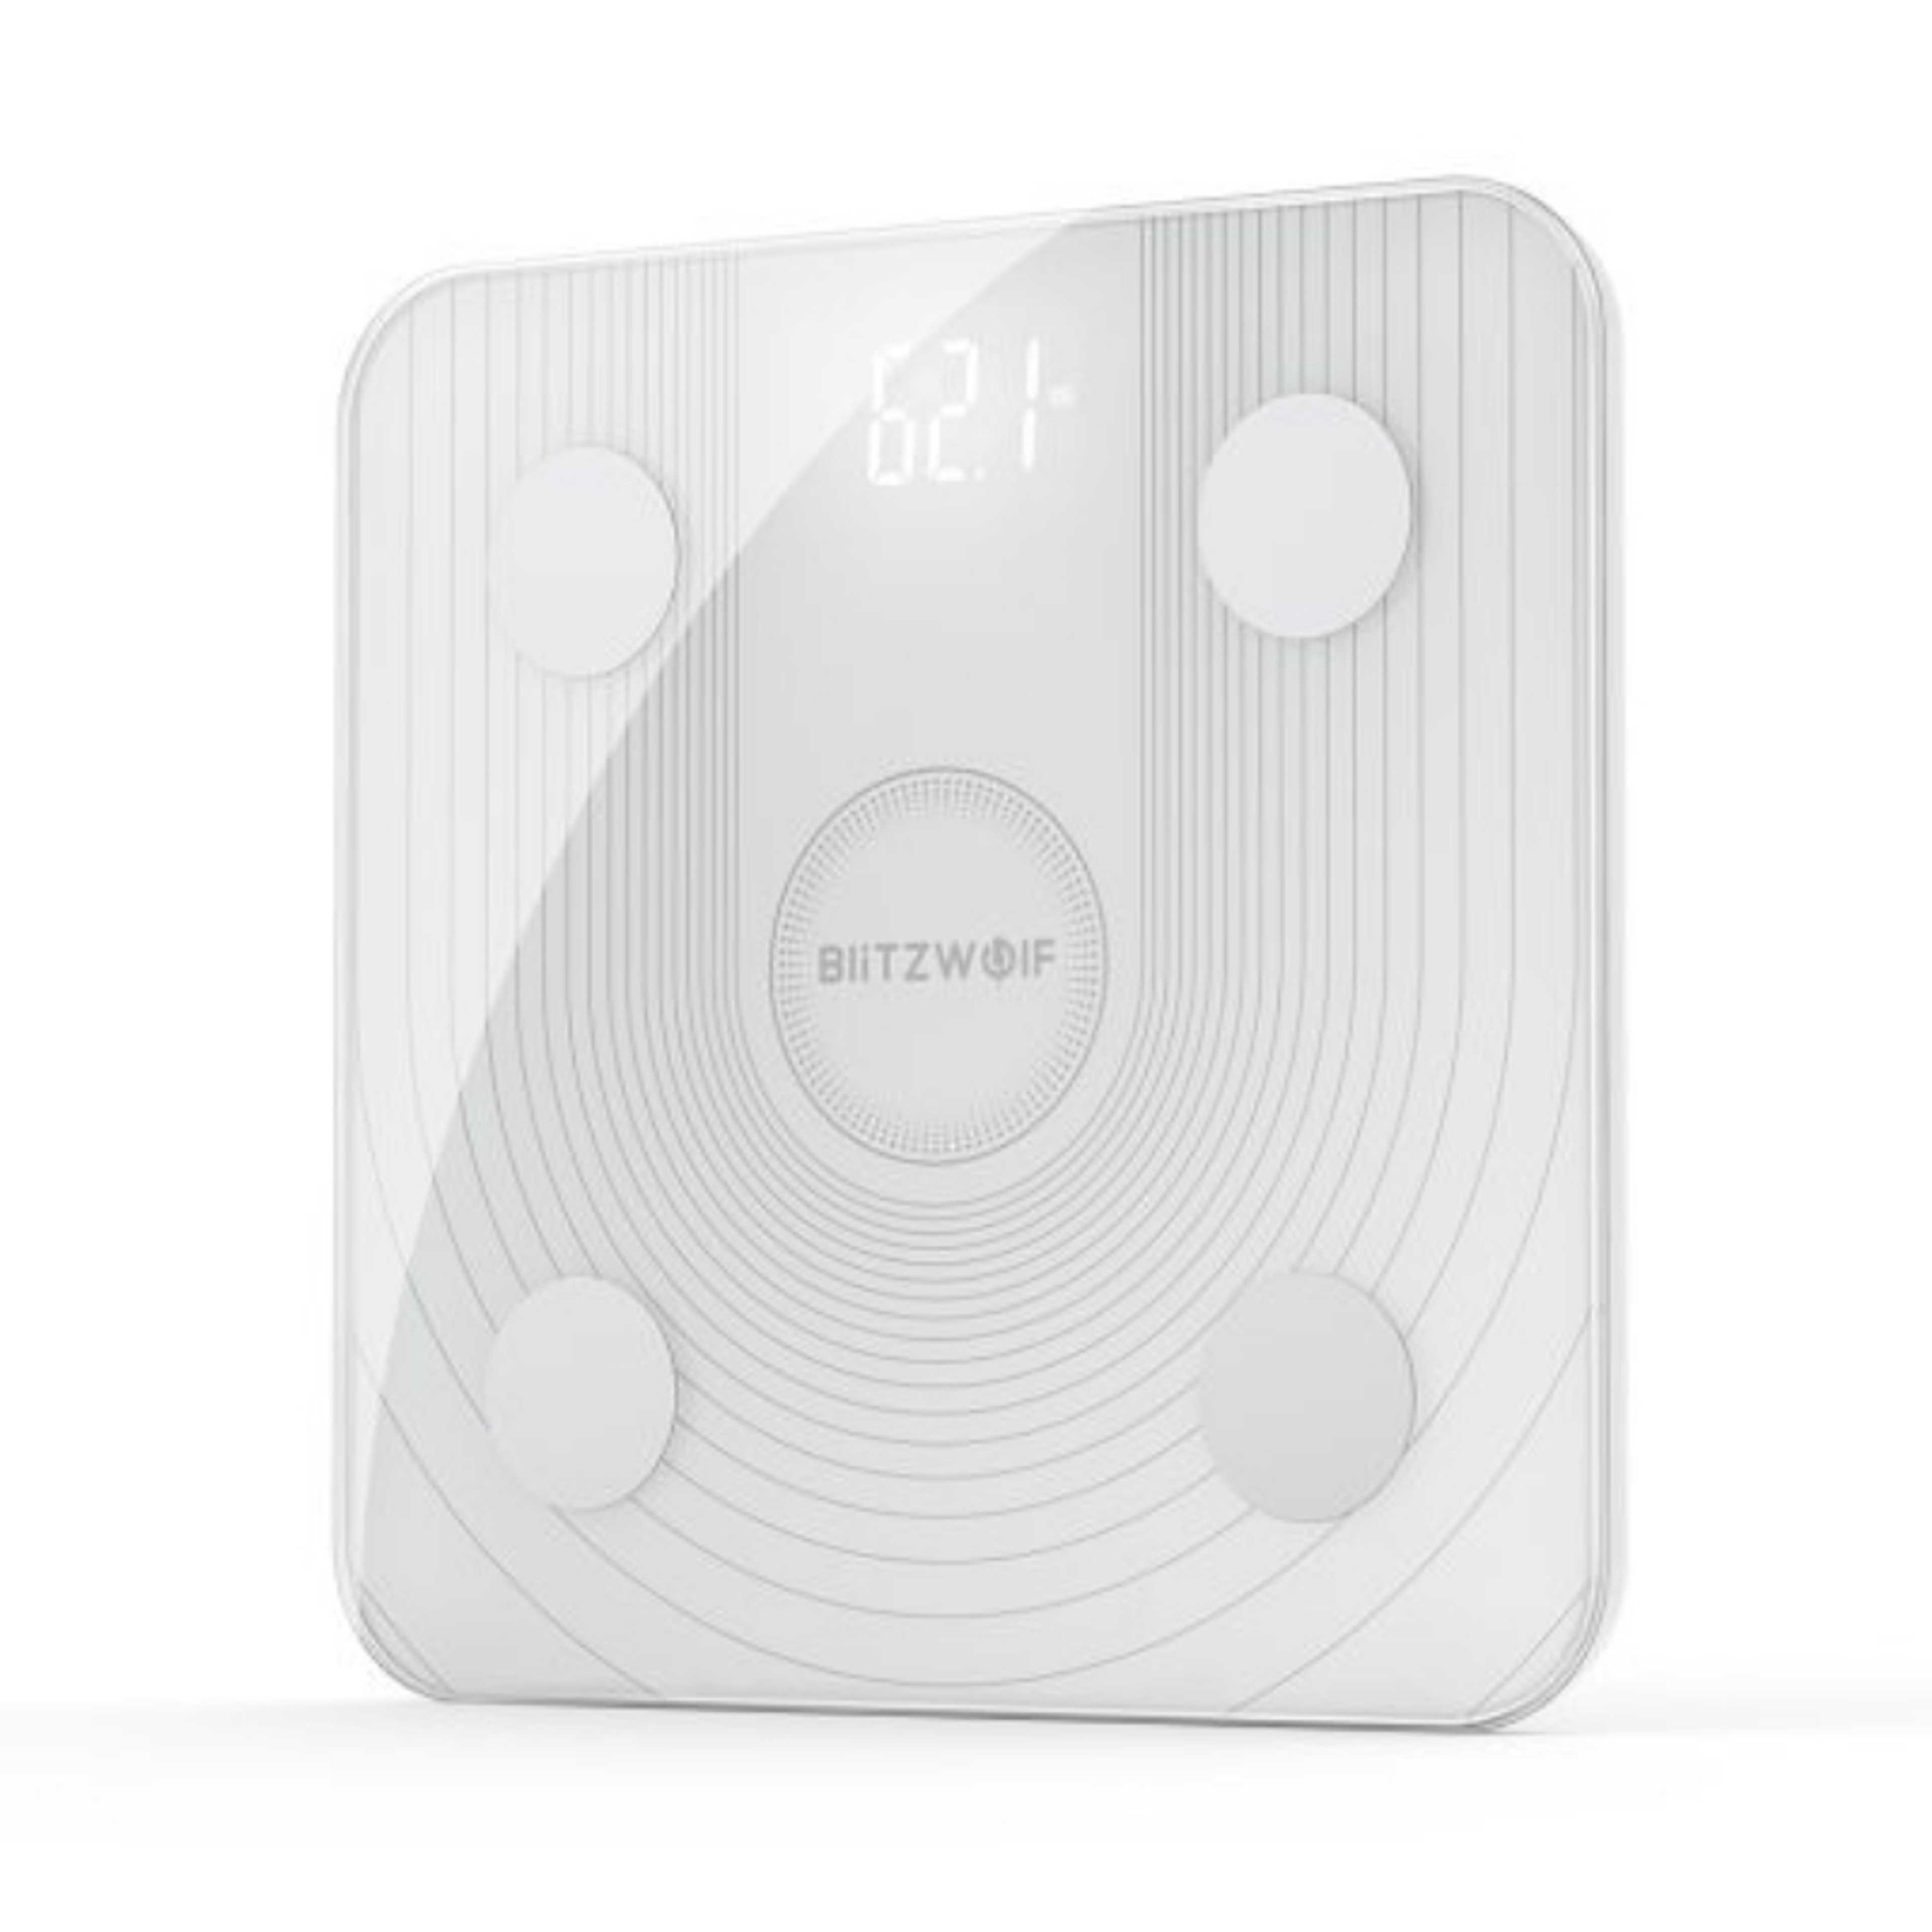 BlitzWolf BW-SC1 Smart Body Fat Scale with “G” Sensor, Accurate BIA Chip, All-round Health Data, Dual Weighing Modes, Modern Styling